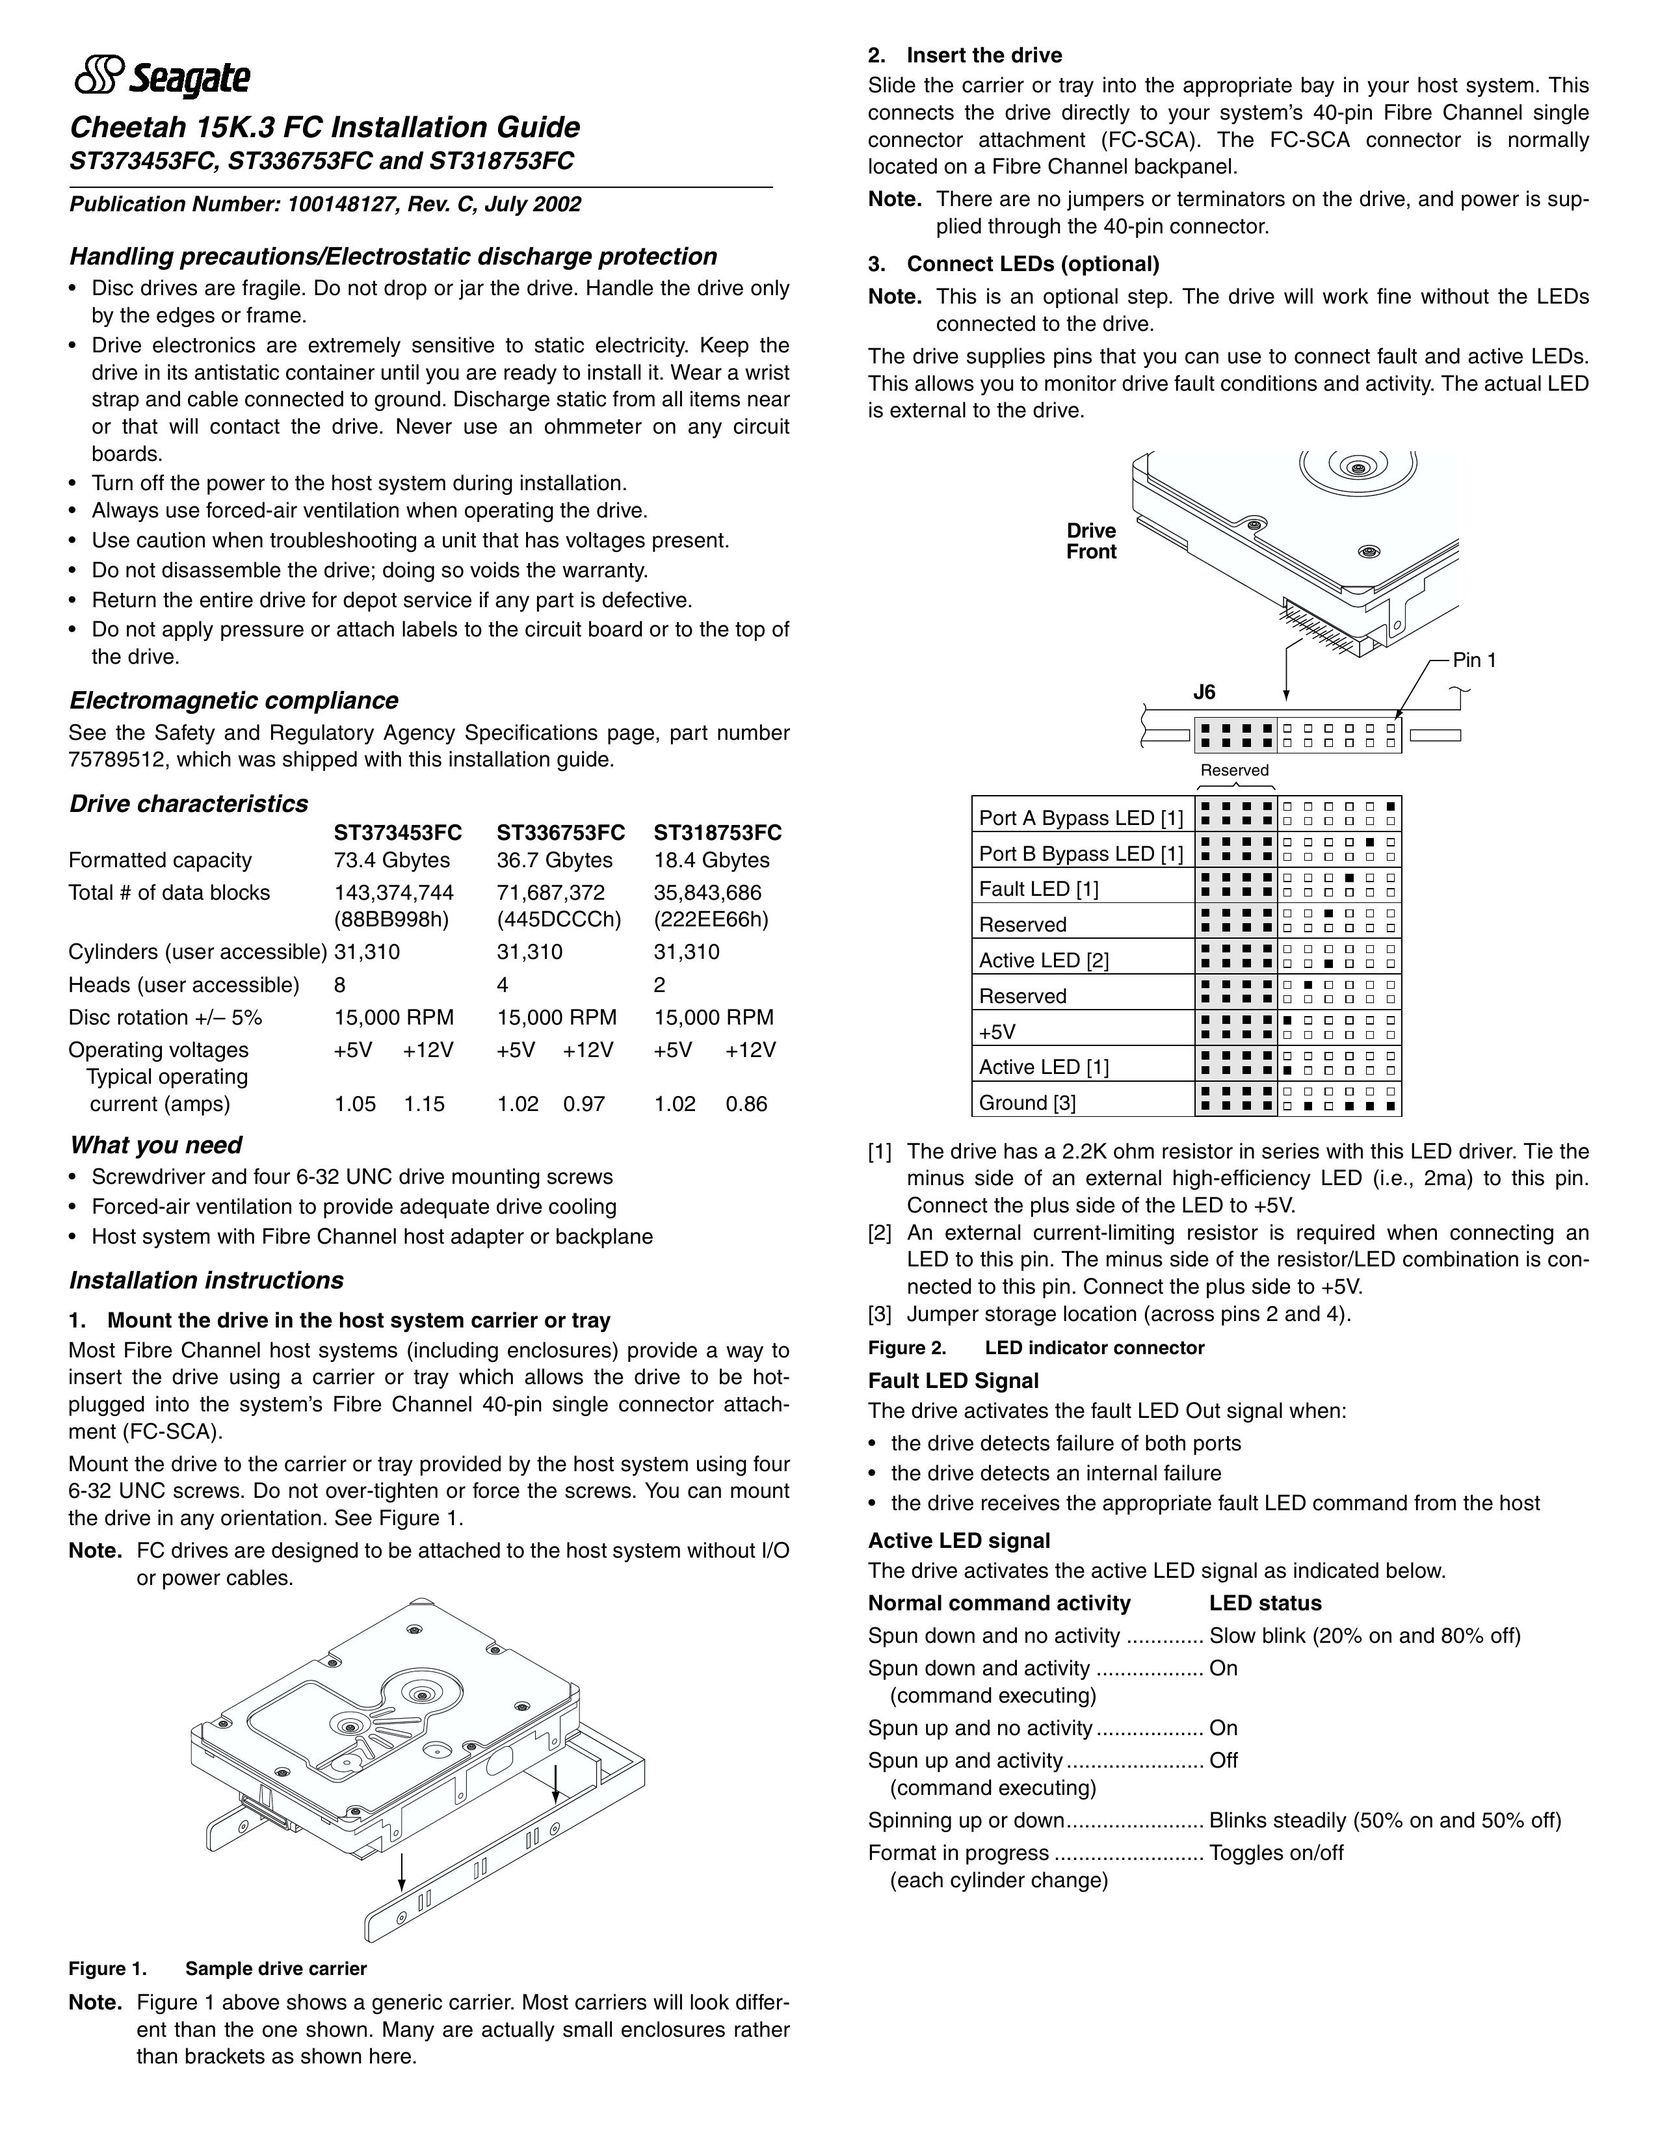 Seagate ST336753FC Power Supply User Manual